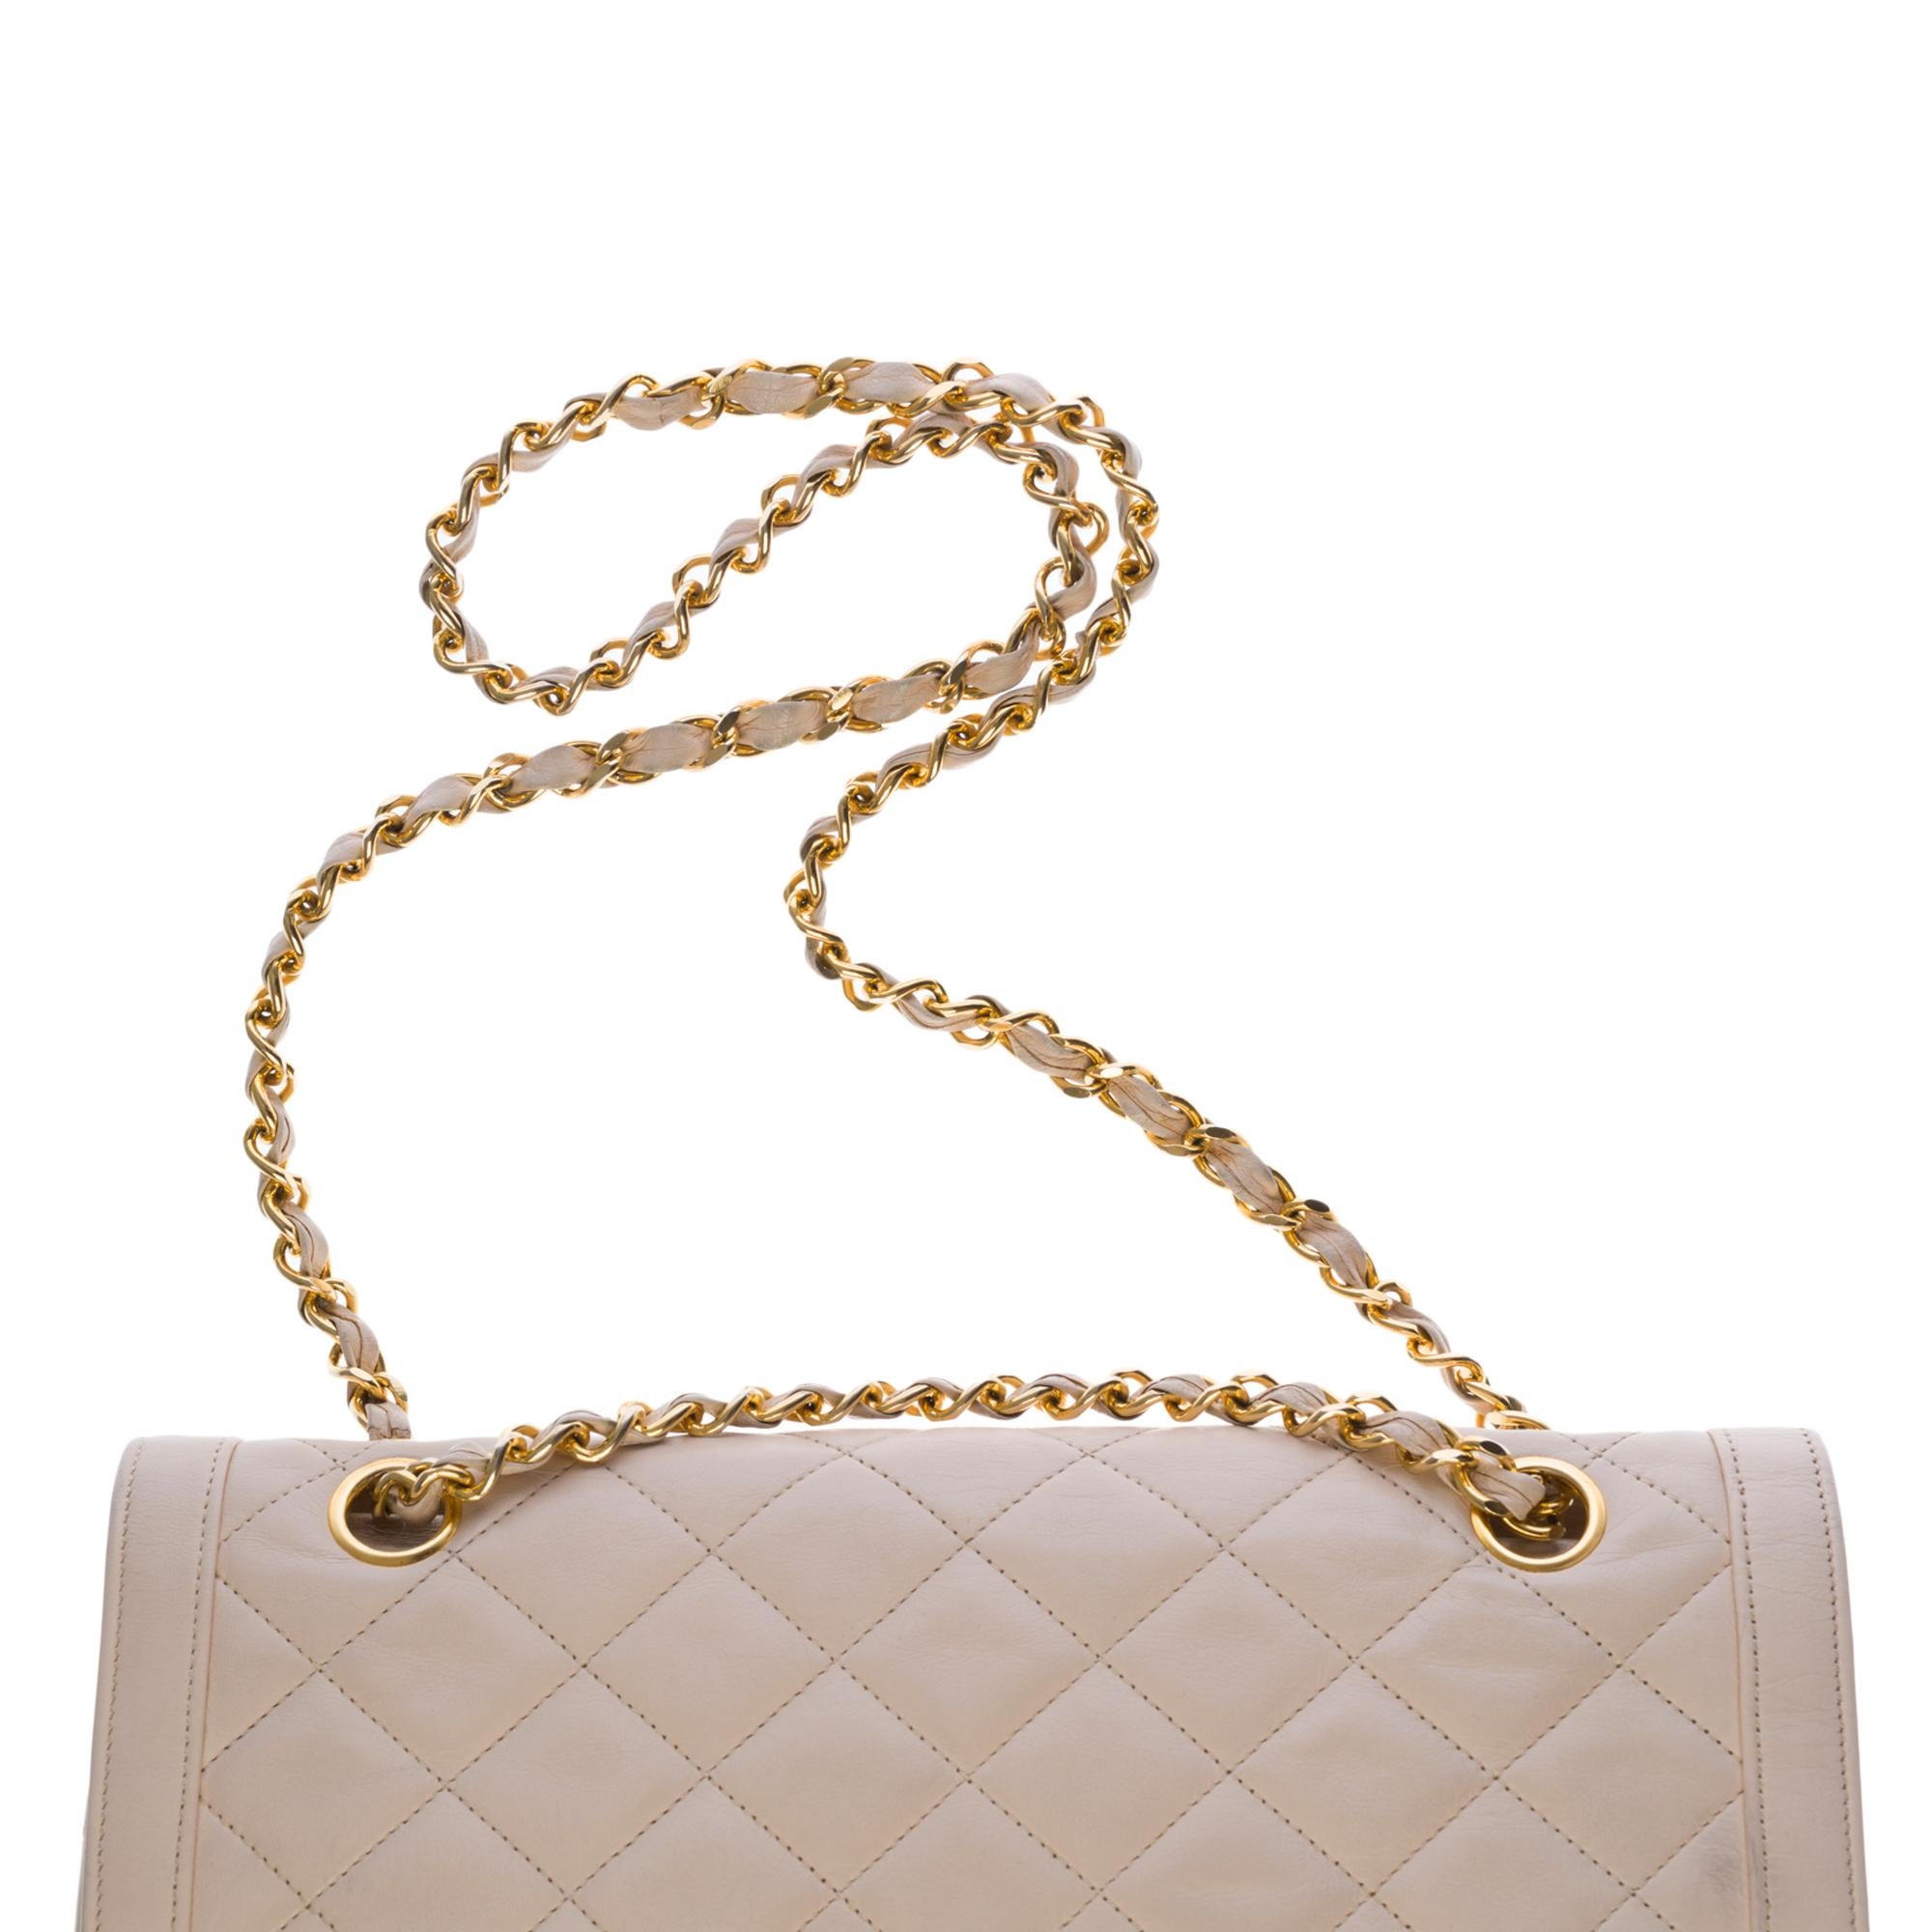 Rare Chanel Classic Double Flap shoulder bag in beige quilted leather and GHW 2